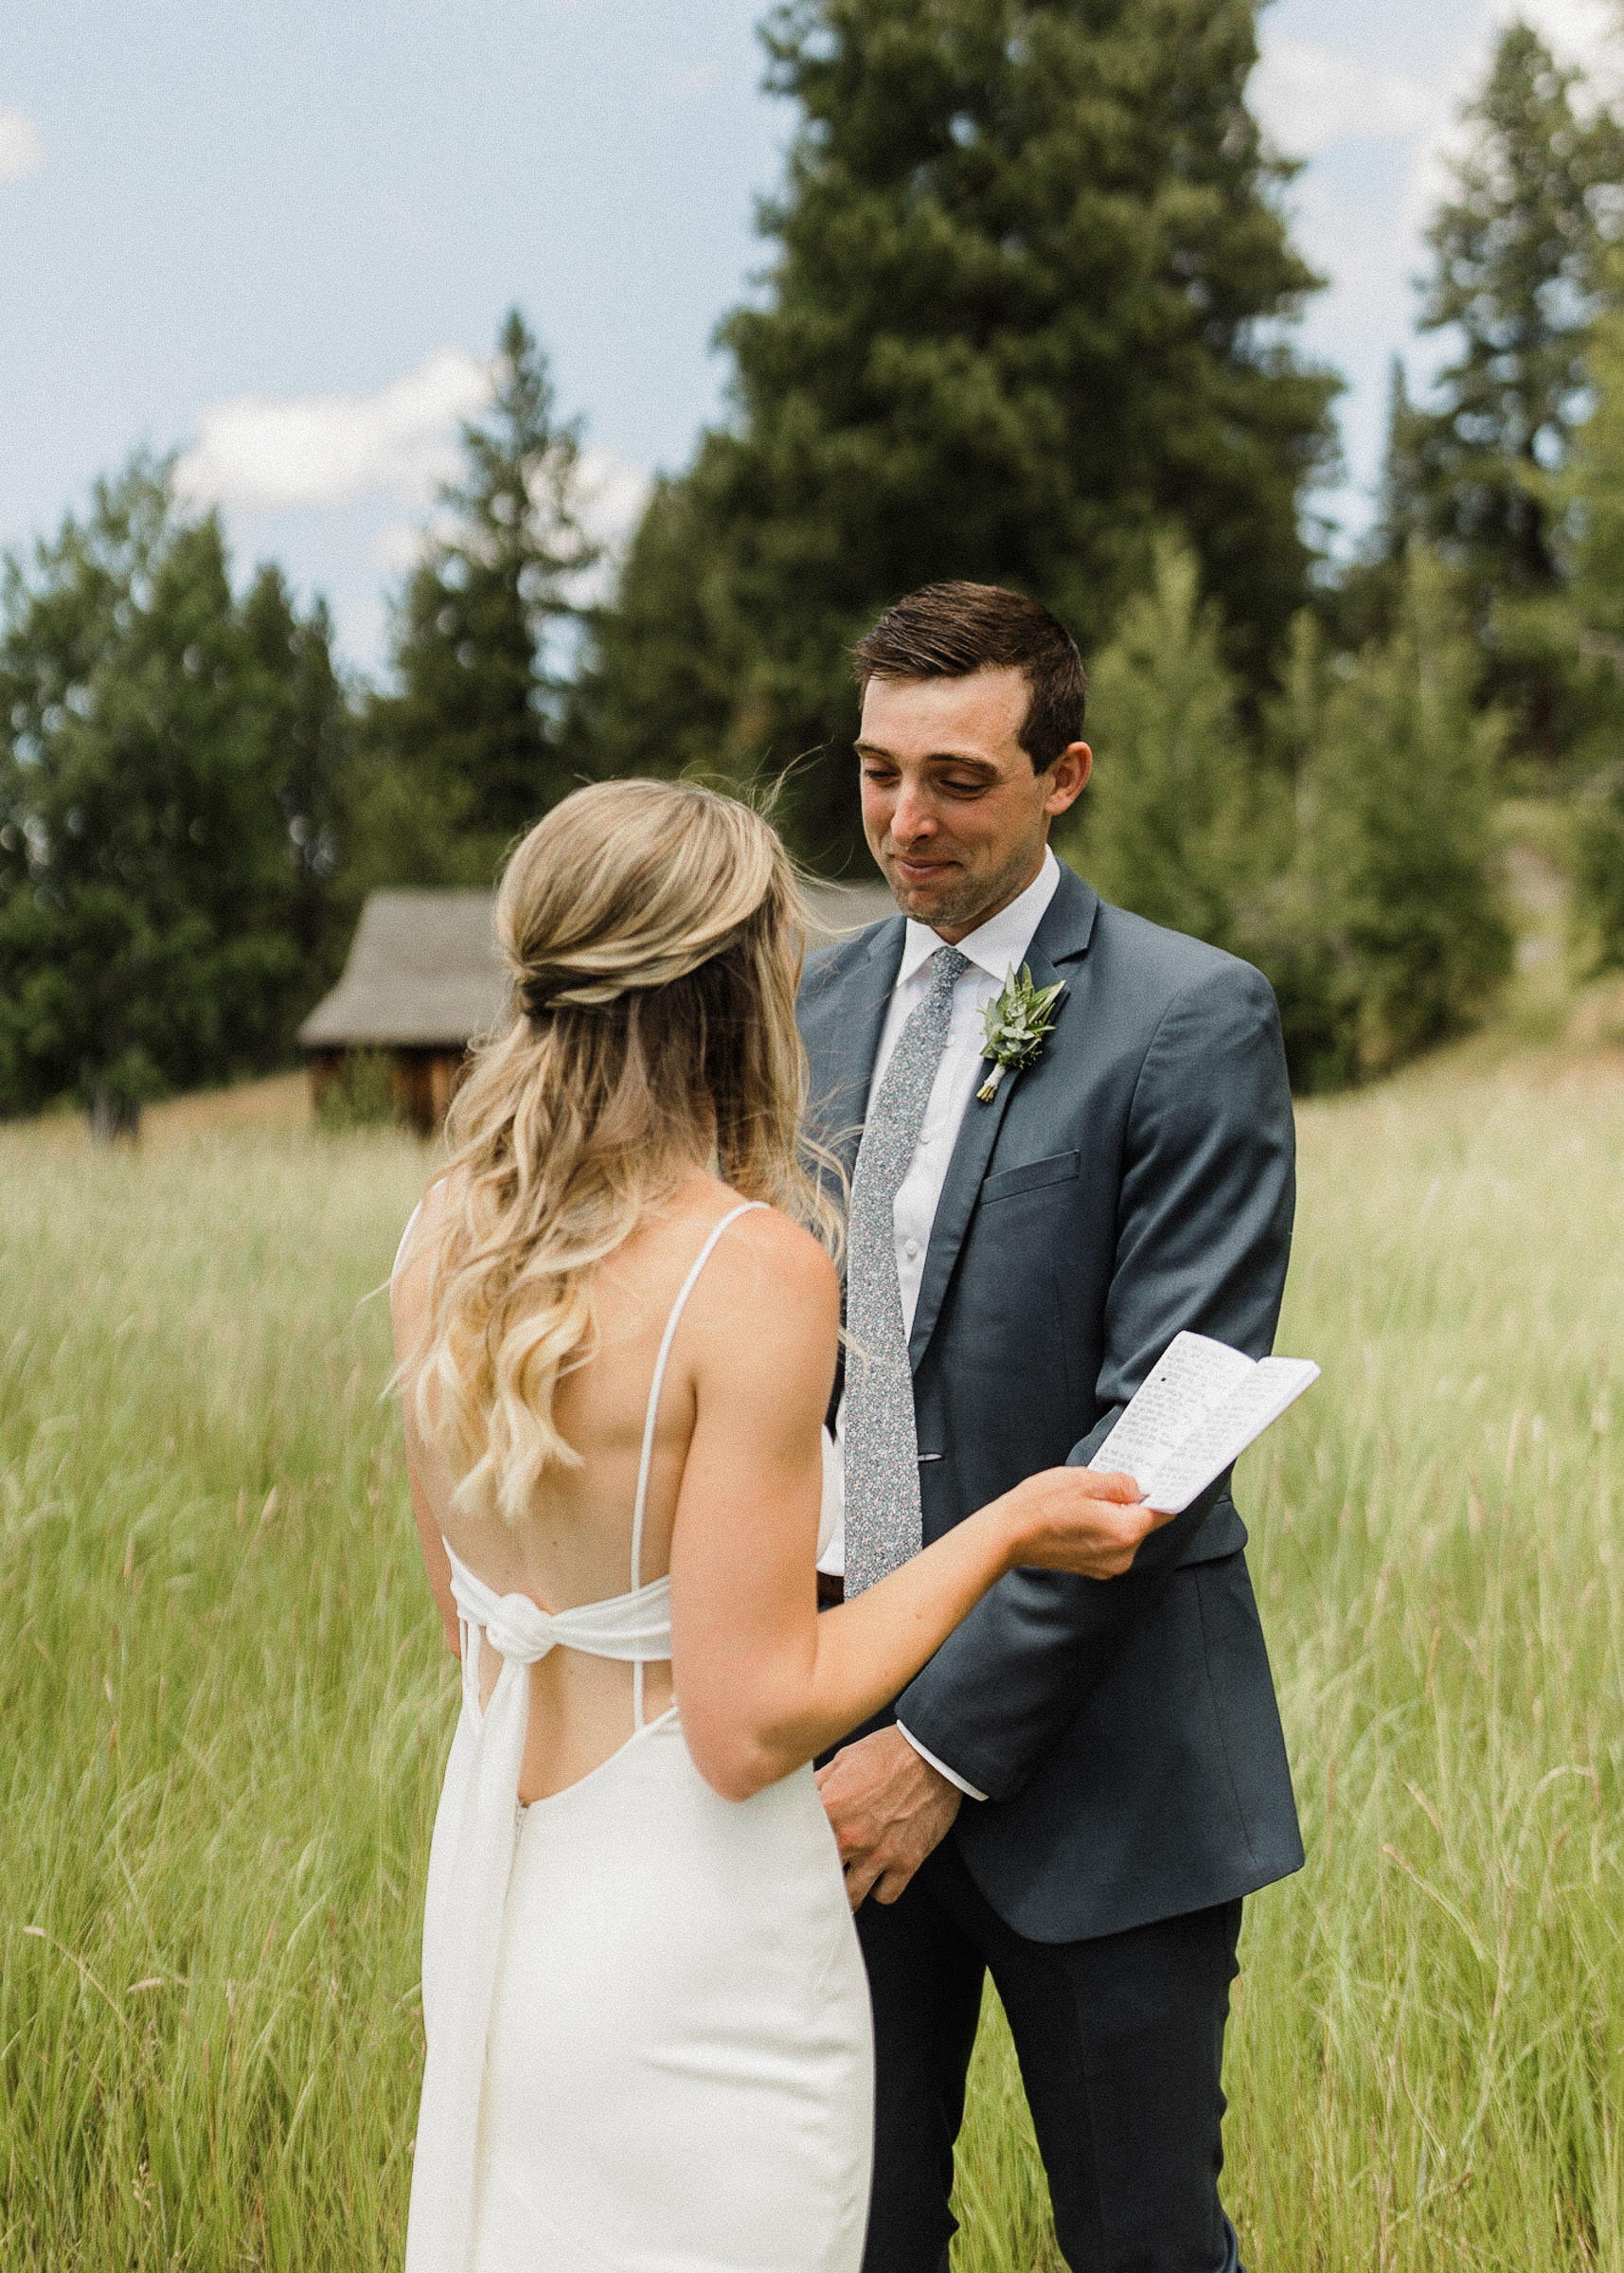 Groom reacts emotionally during a private vow reading in a field